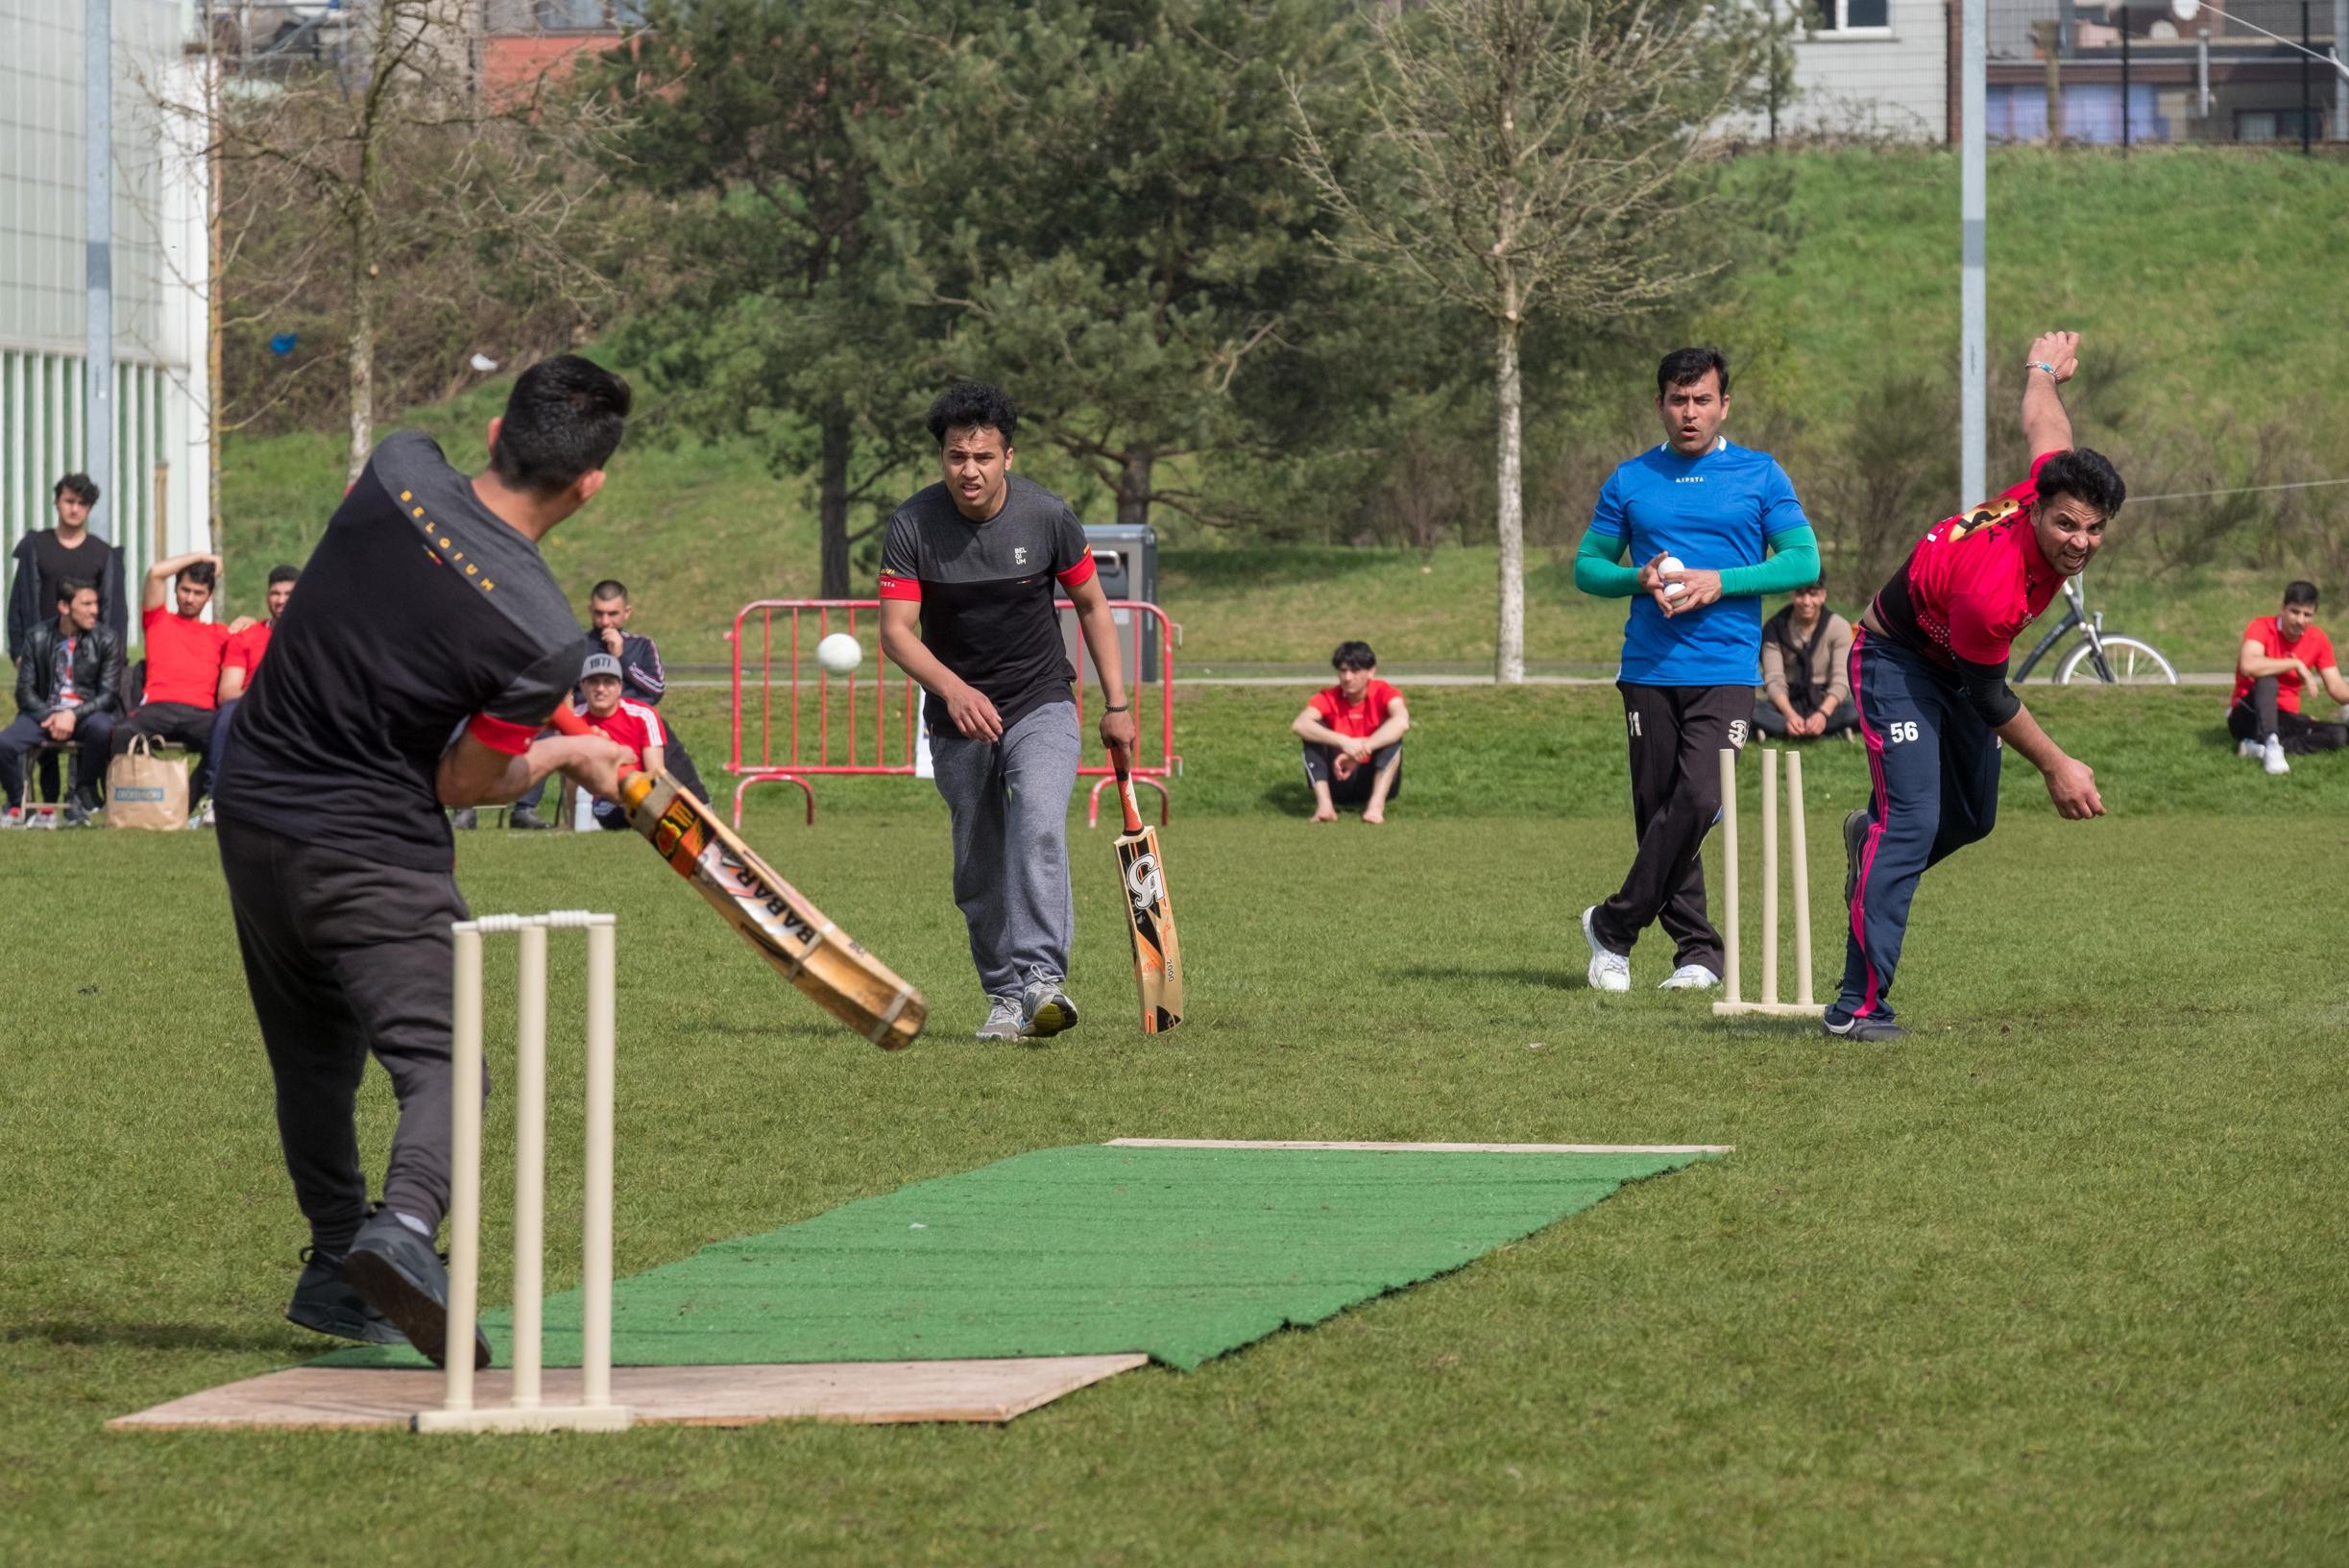 The cricket cages at Spur Noord will be an excellent asset to the fast-growing sport: “Important integration for Afghan youth” (Antwerp)